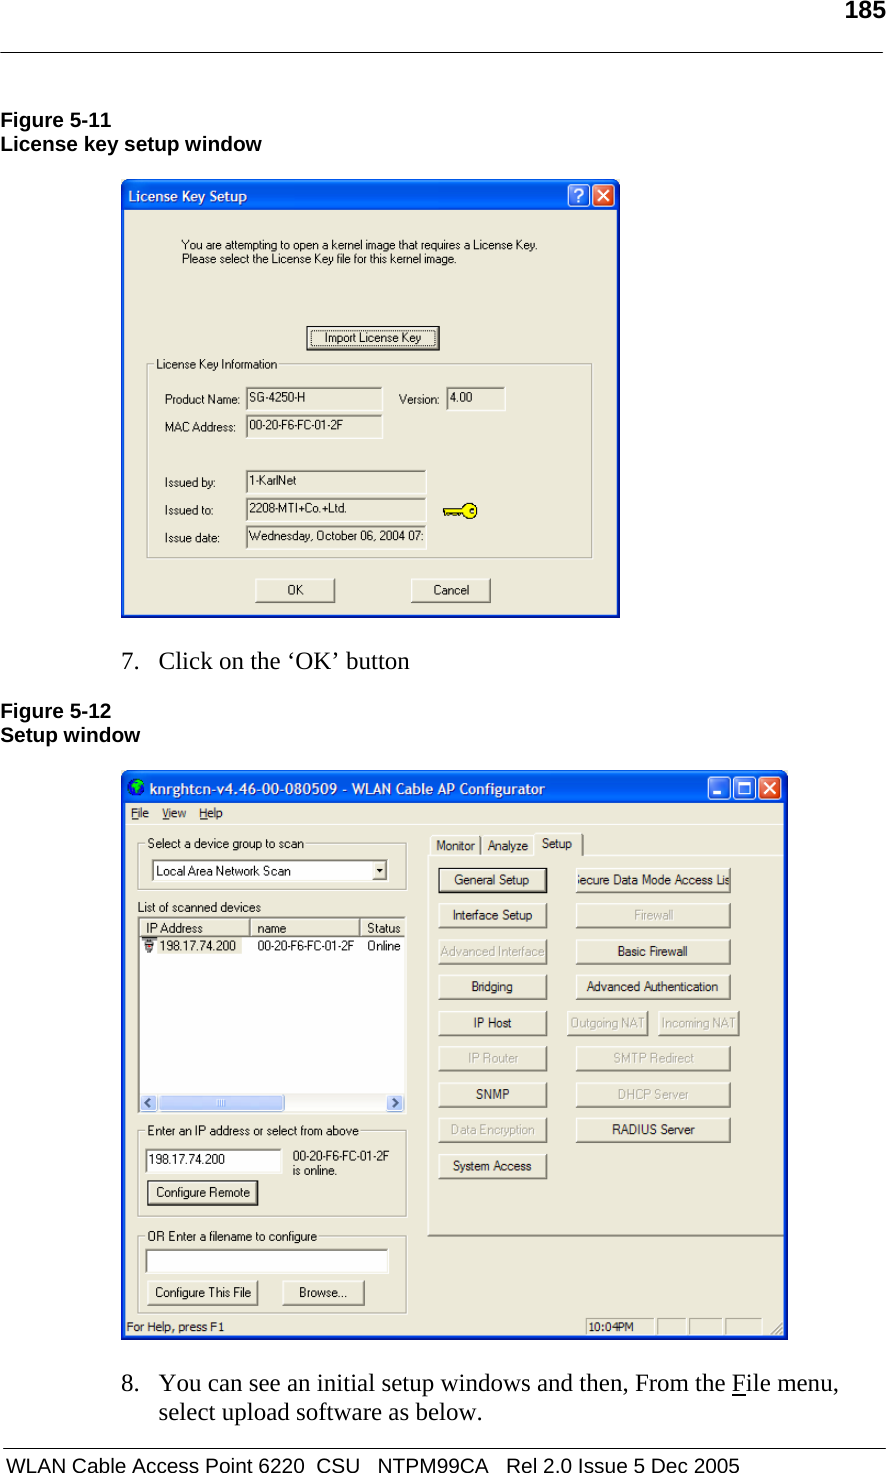   185   WLAN Cable Access Point 6220  CSU   NTPM99CA   Rel 2.0 Issue 5 Dec 2005 Figure 5-11 License key setup window    7. Click on the ‘OK’ button   Figure 5-12 Setup window    8. You can see an initial setup windows and then, From the File menu, select upload software as below. 